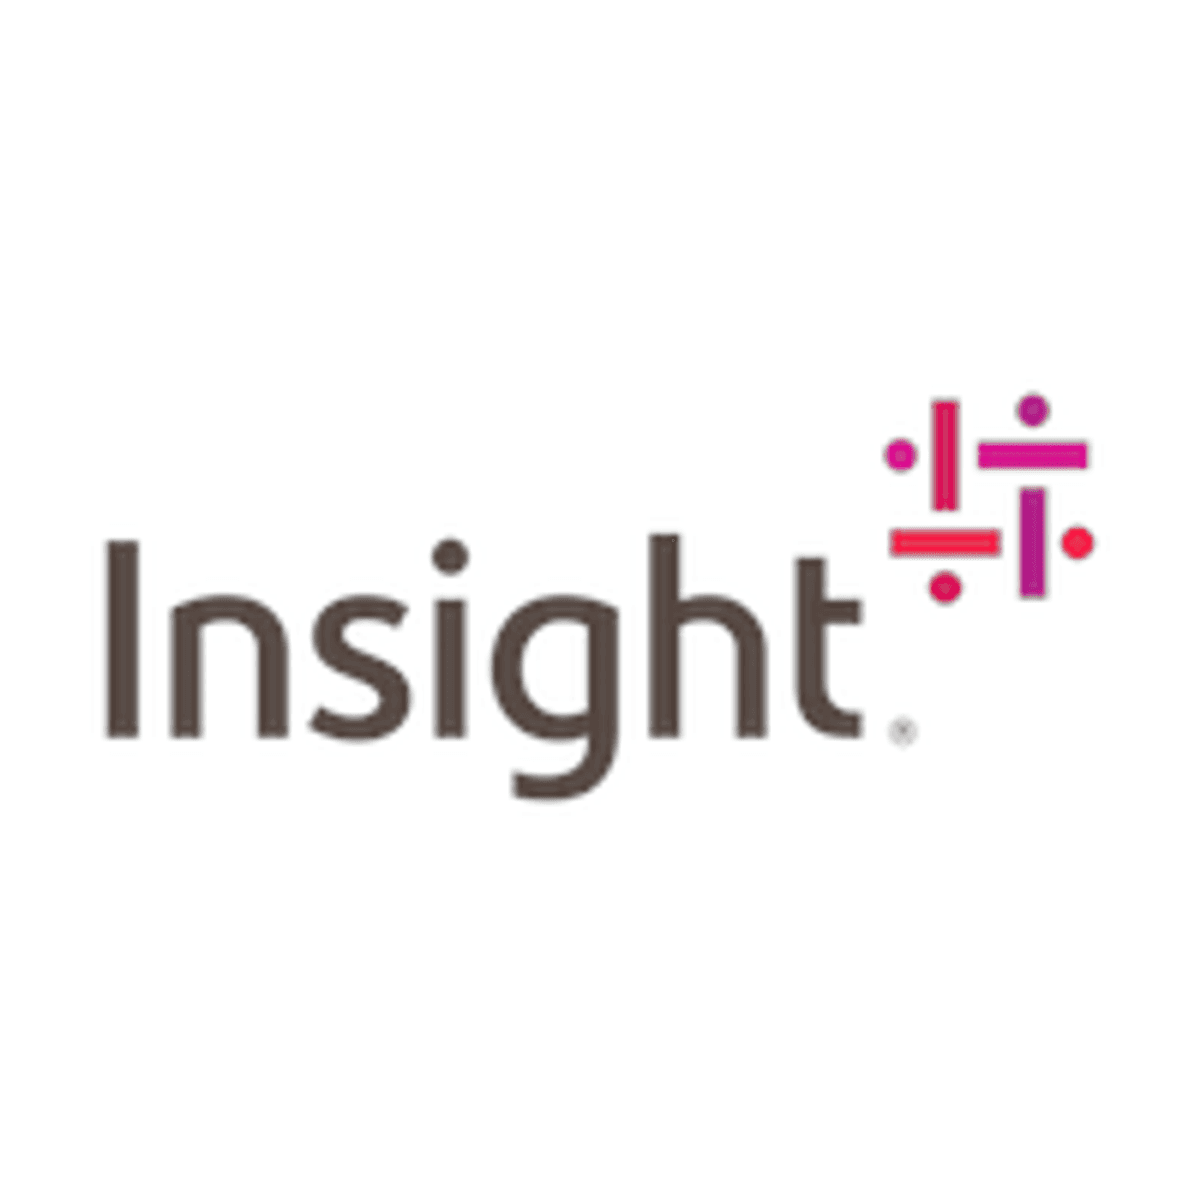 Insight in IT-dienstensector van Fortune 2021 World’s Most Admired Companies image